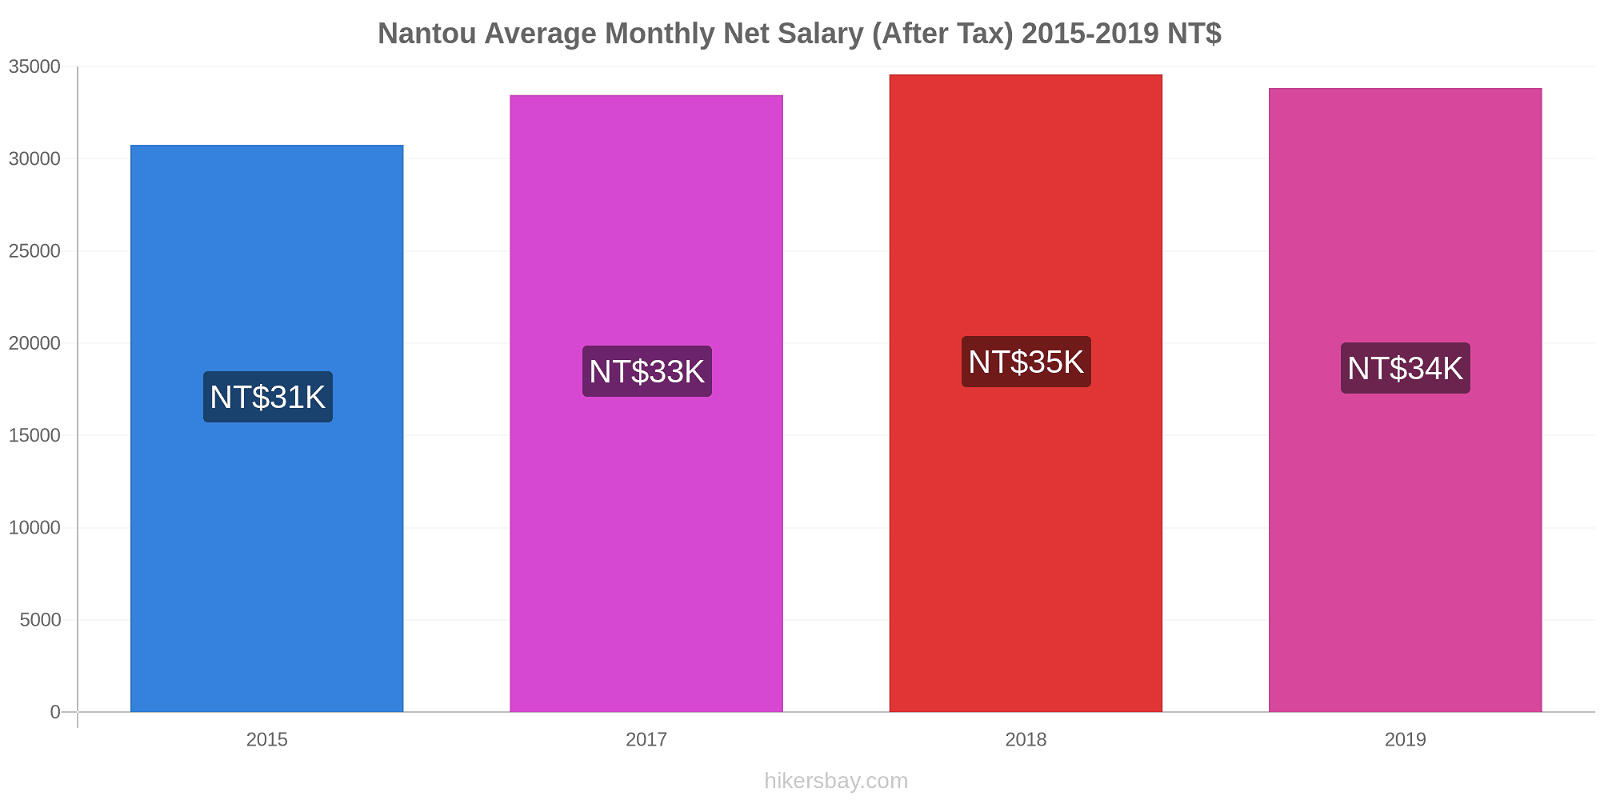 Nantou price changes Average Monthly Net Salary (After Tax) hikersbay.com